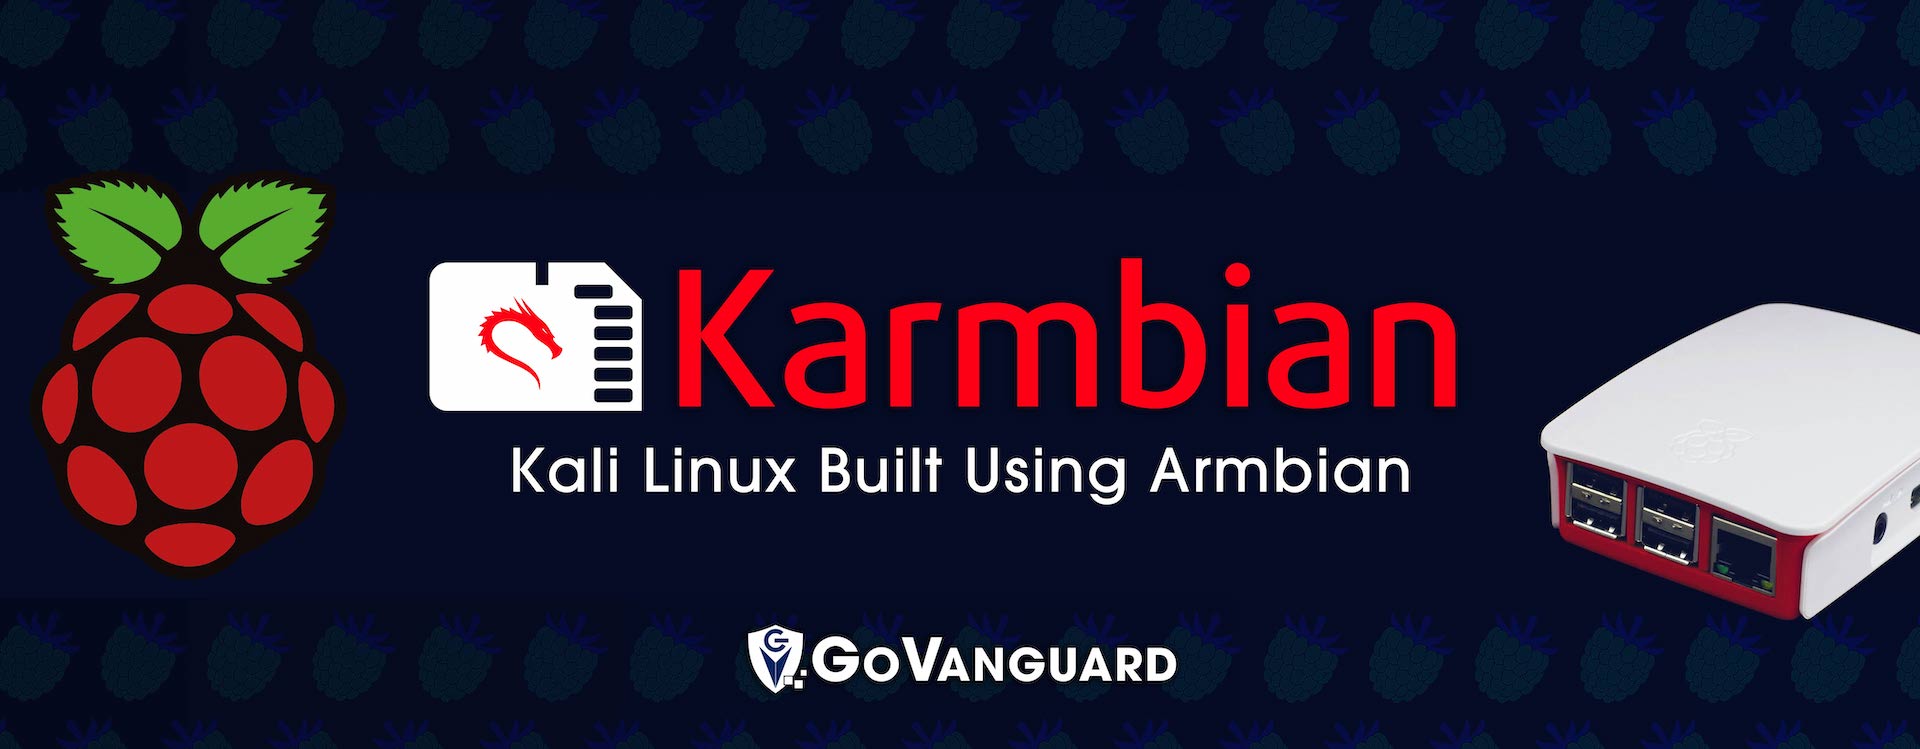 Meet Karmbian, an ARM Linux Distro for Ethical Hackers Based on Kali Linux and Armbian